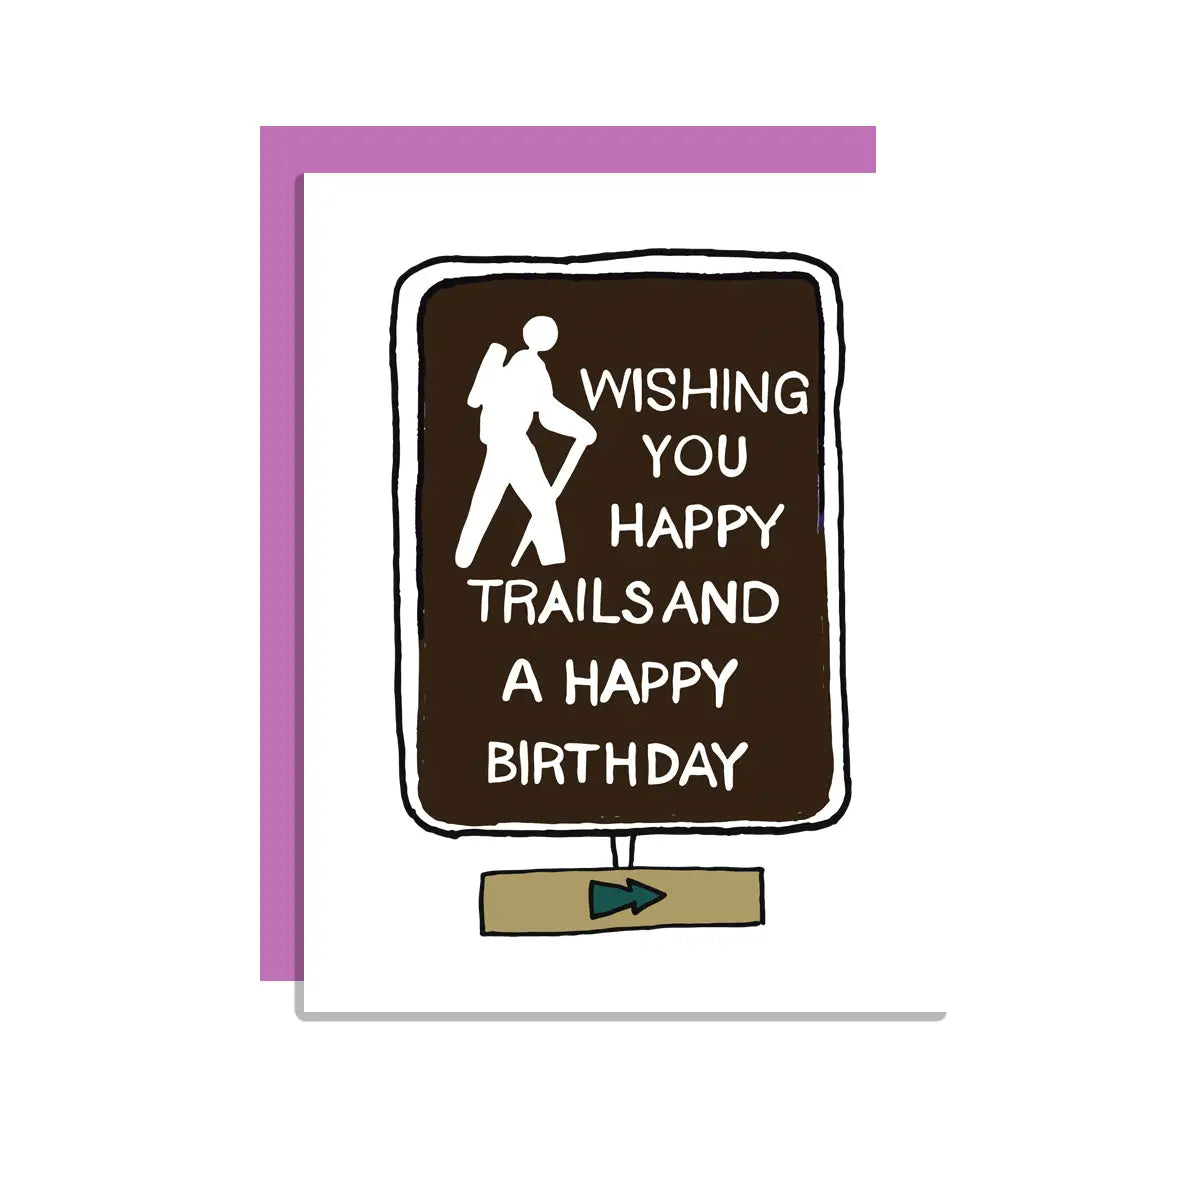 HAPPY TRAILS card